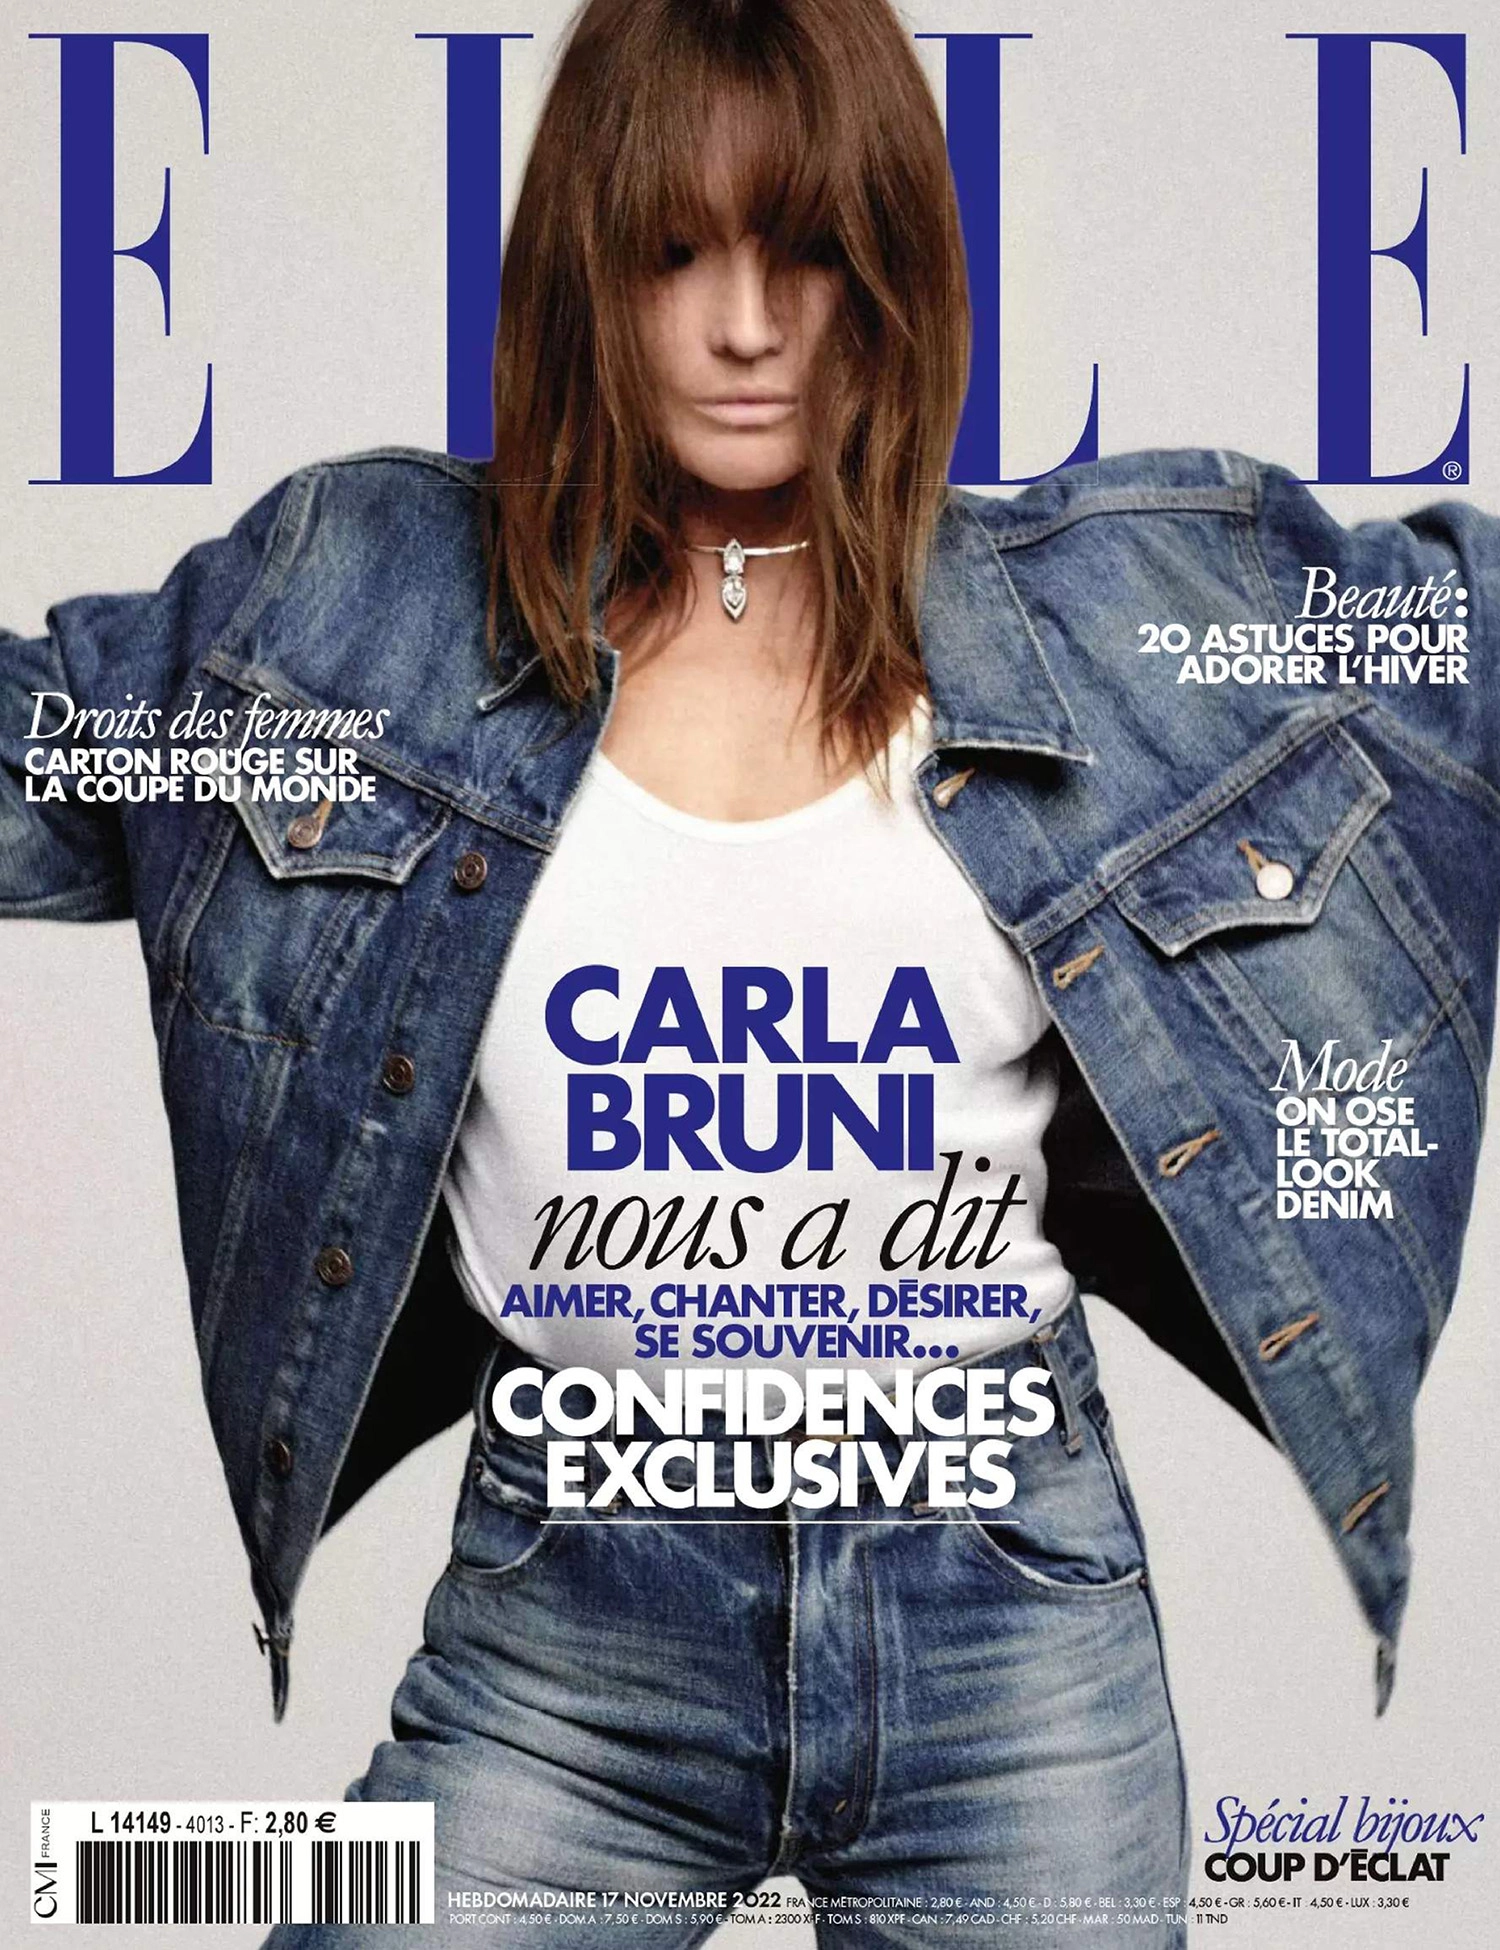 Carla Bruni covers Elle France November 17th, 2022 by Chris Colls